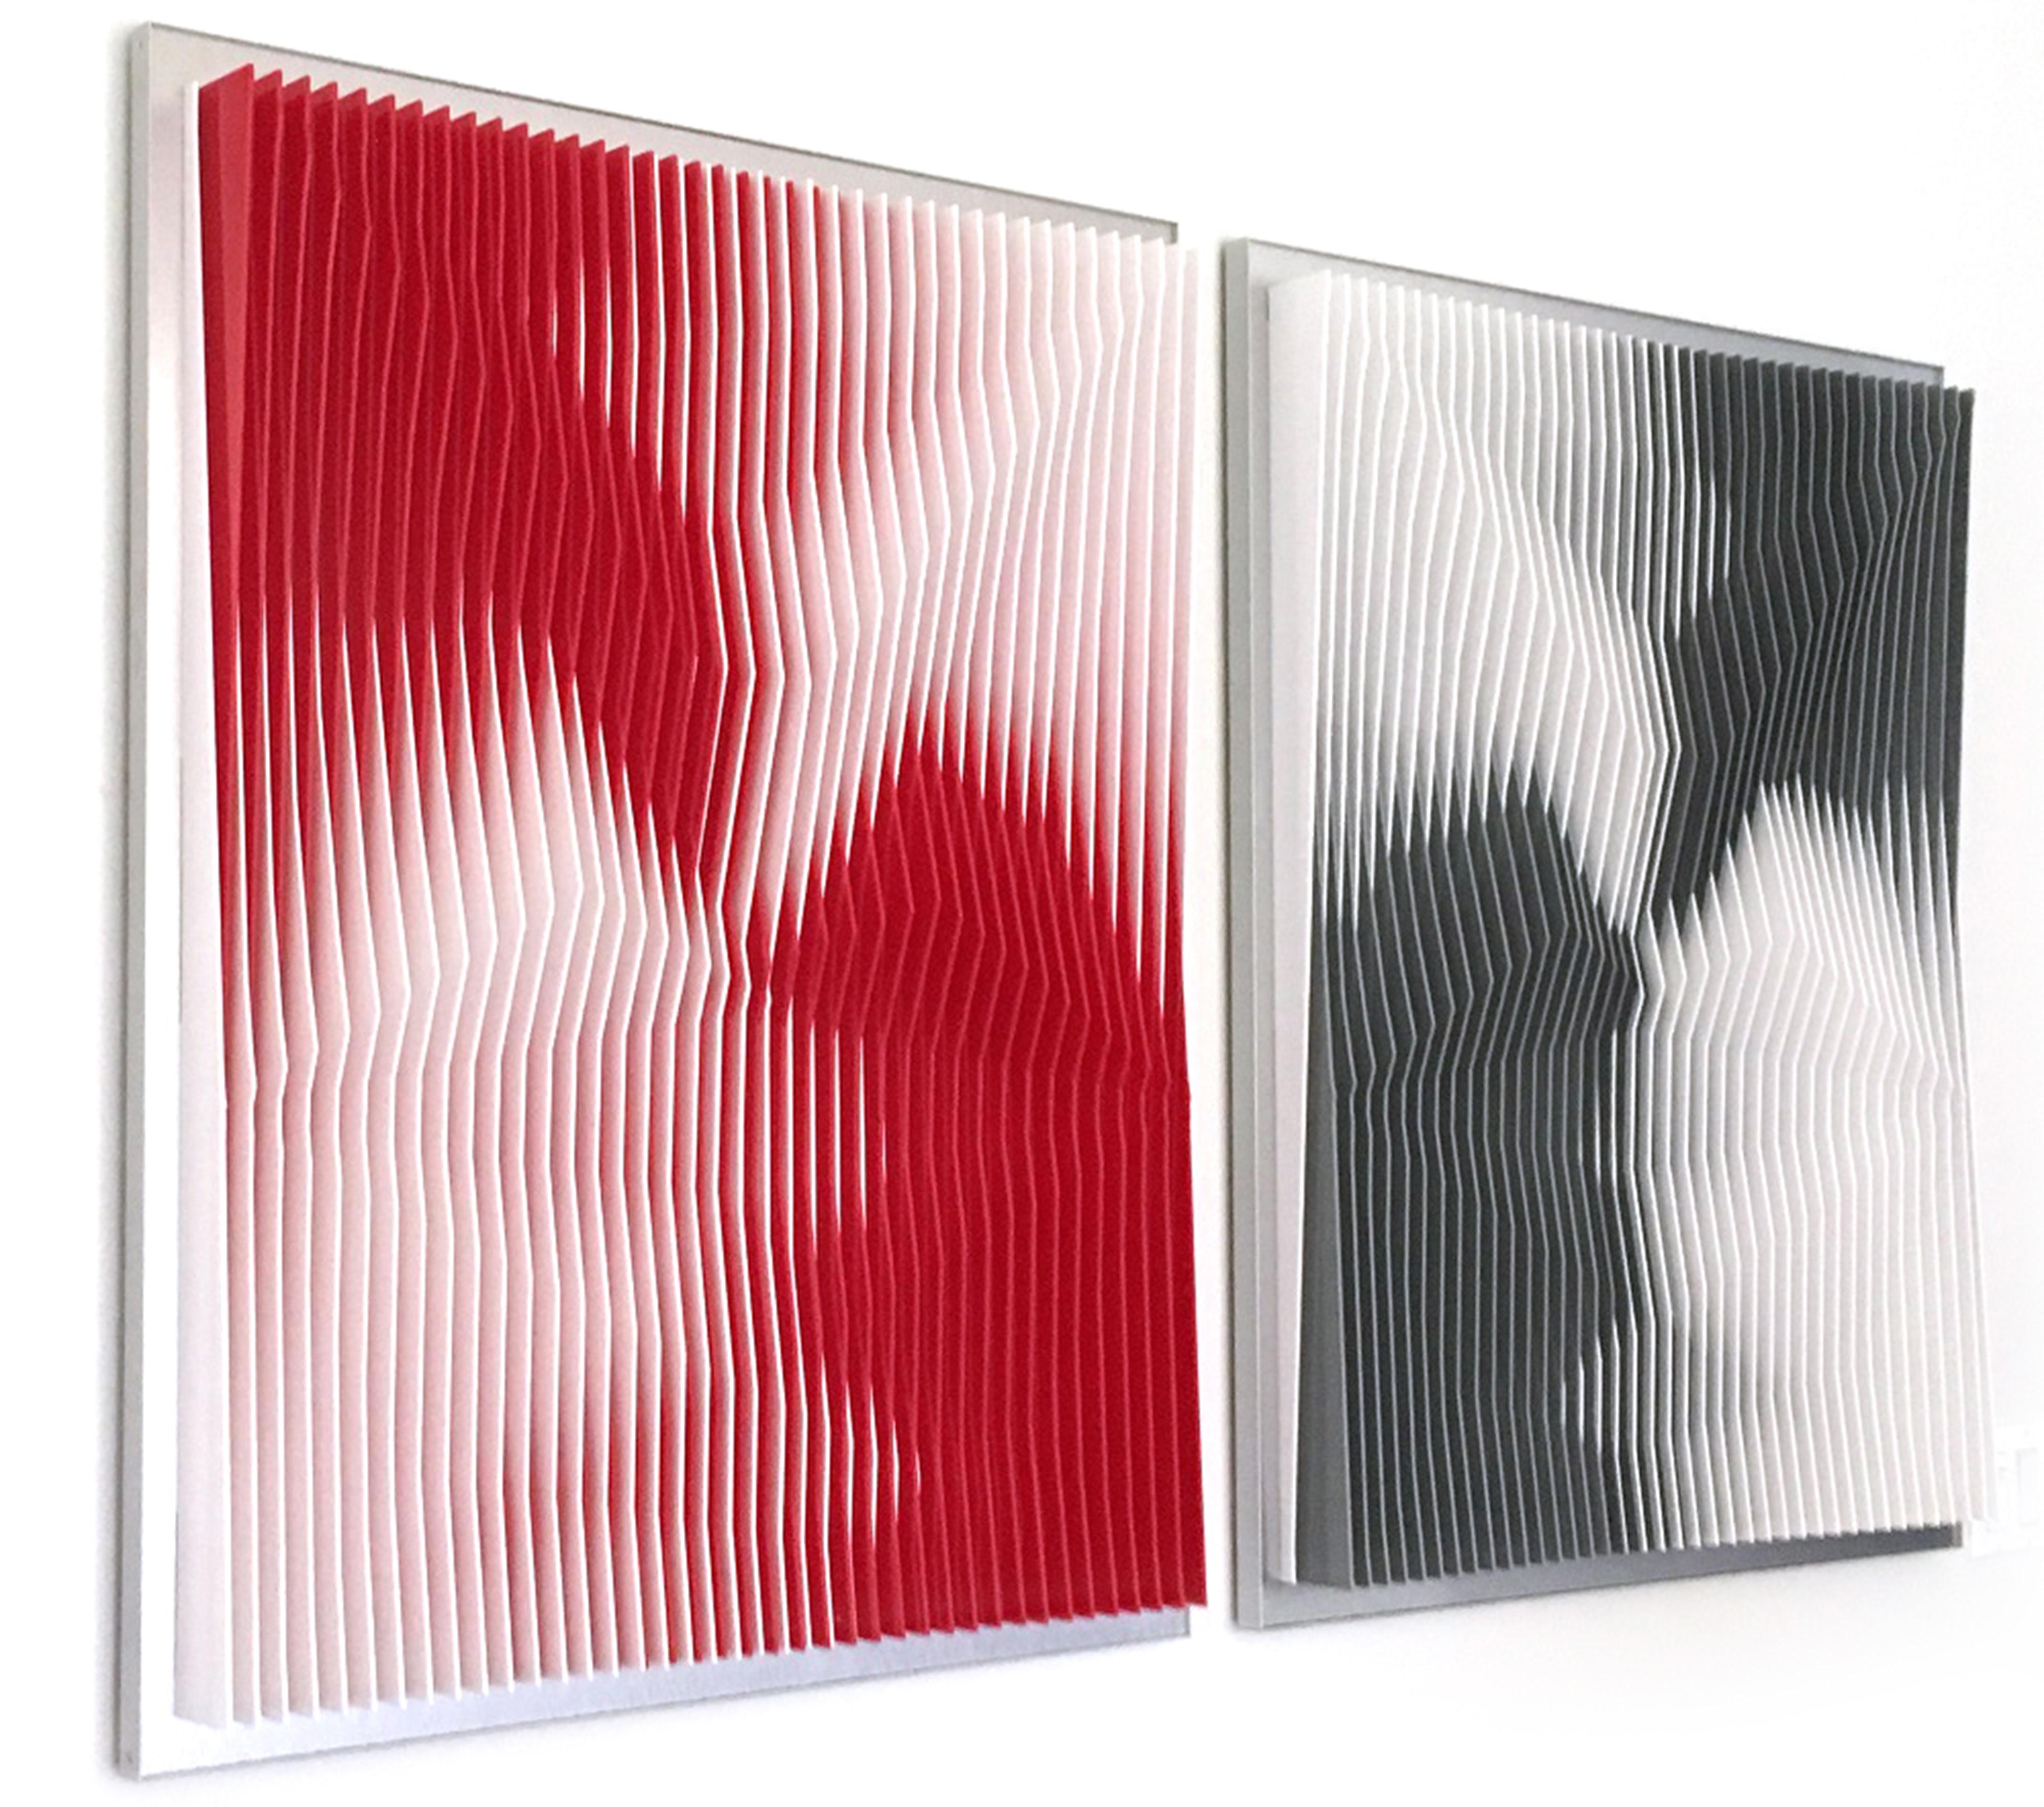 Jose Margulis Abstract Sculpture - JUxtapos Red & Grey', Kinetic Wall Art,  Red and Grey 